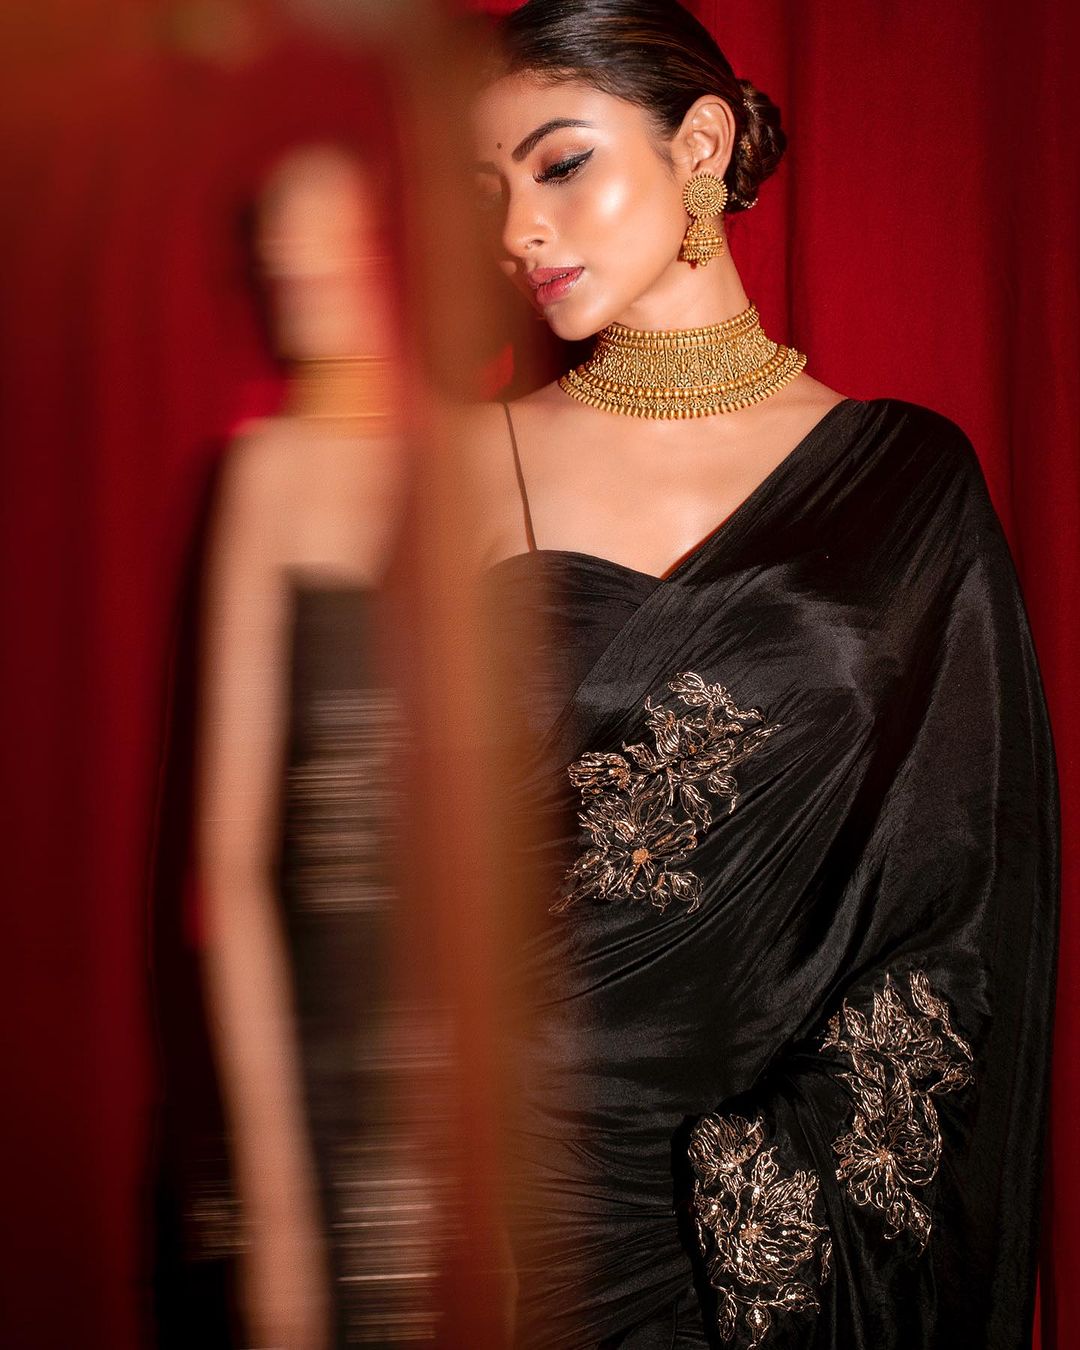 Black Choker Necklace with Earrings for Saree | FashionCrab.com